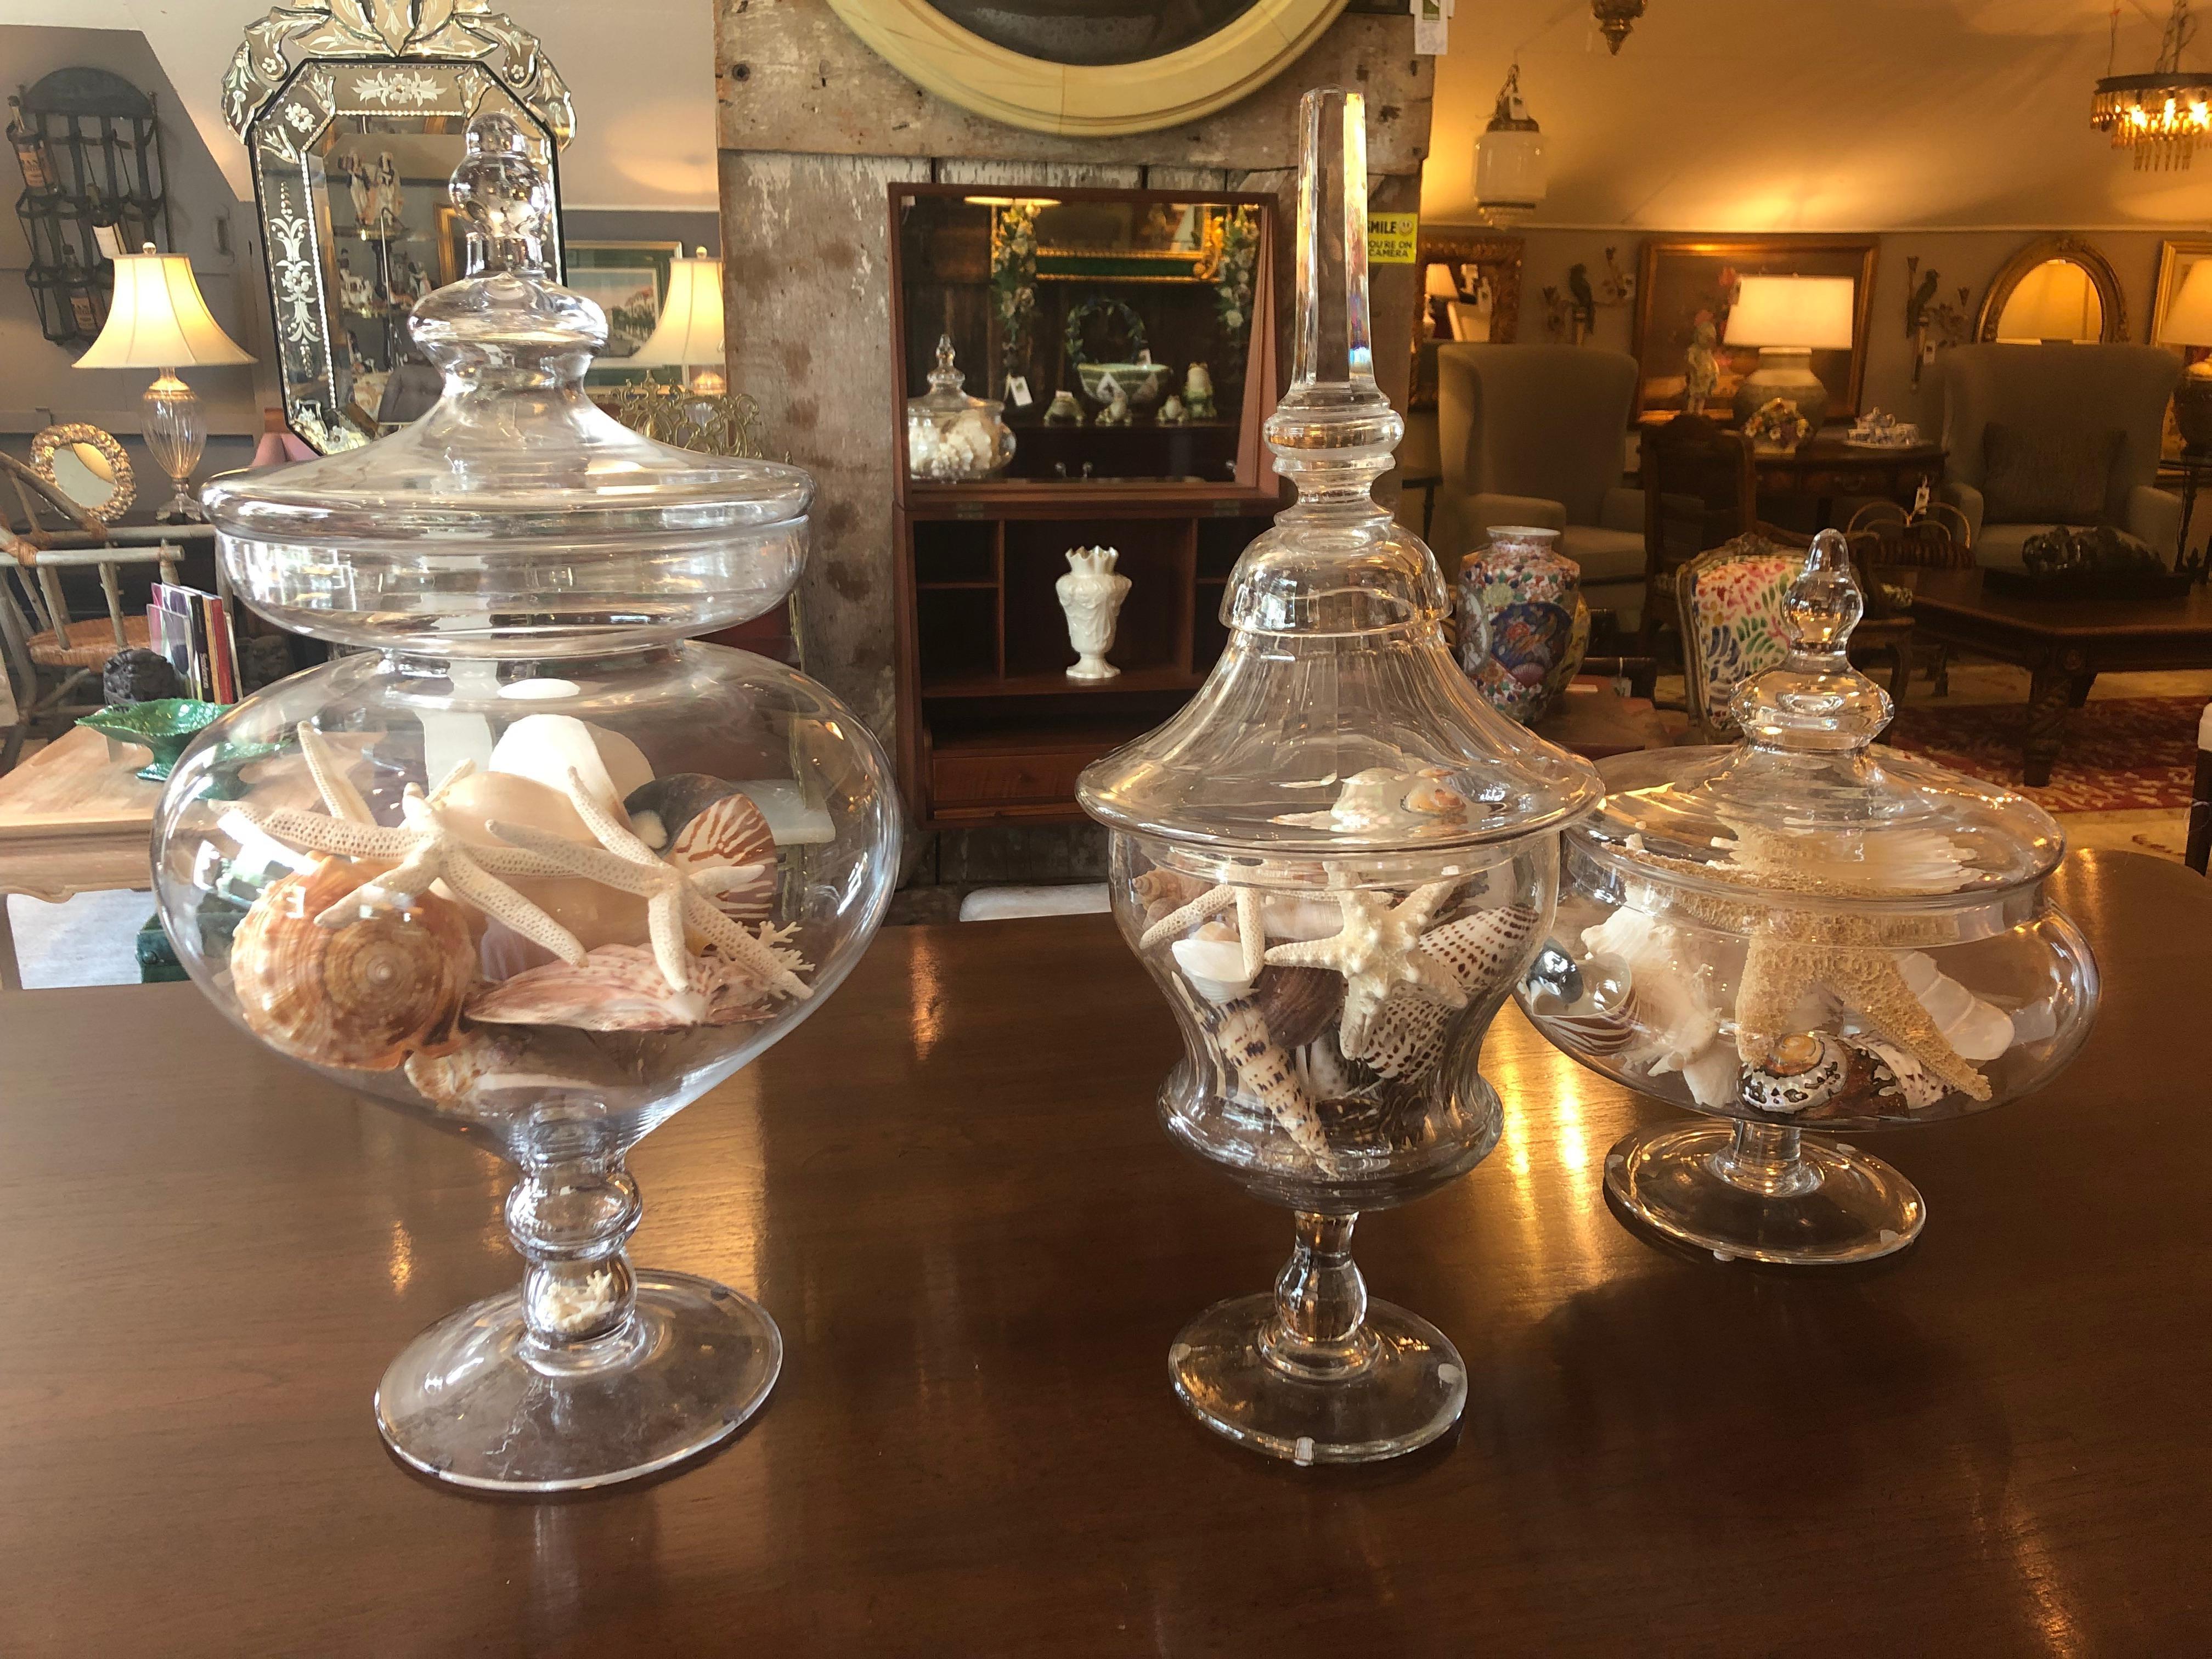 A gorgeous trio of 3 large lidded urns to accessorize dining table, console, center hall or mantel.
They are:
1- 19th century crystal with elongated columnar finial 25 H 10 W 10 D
2- Largest, tallest glass urn 24 H 12 W 12 D
3- Squat large urn